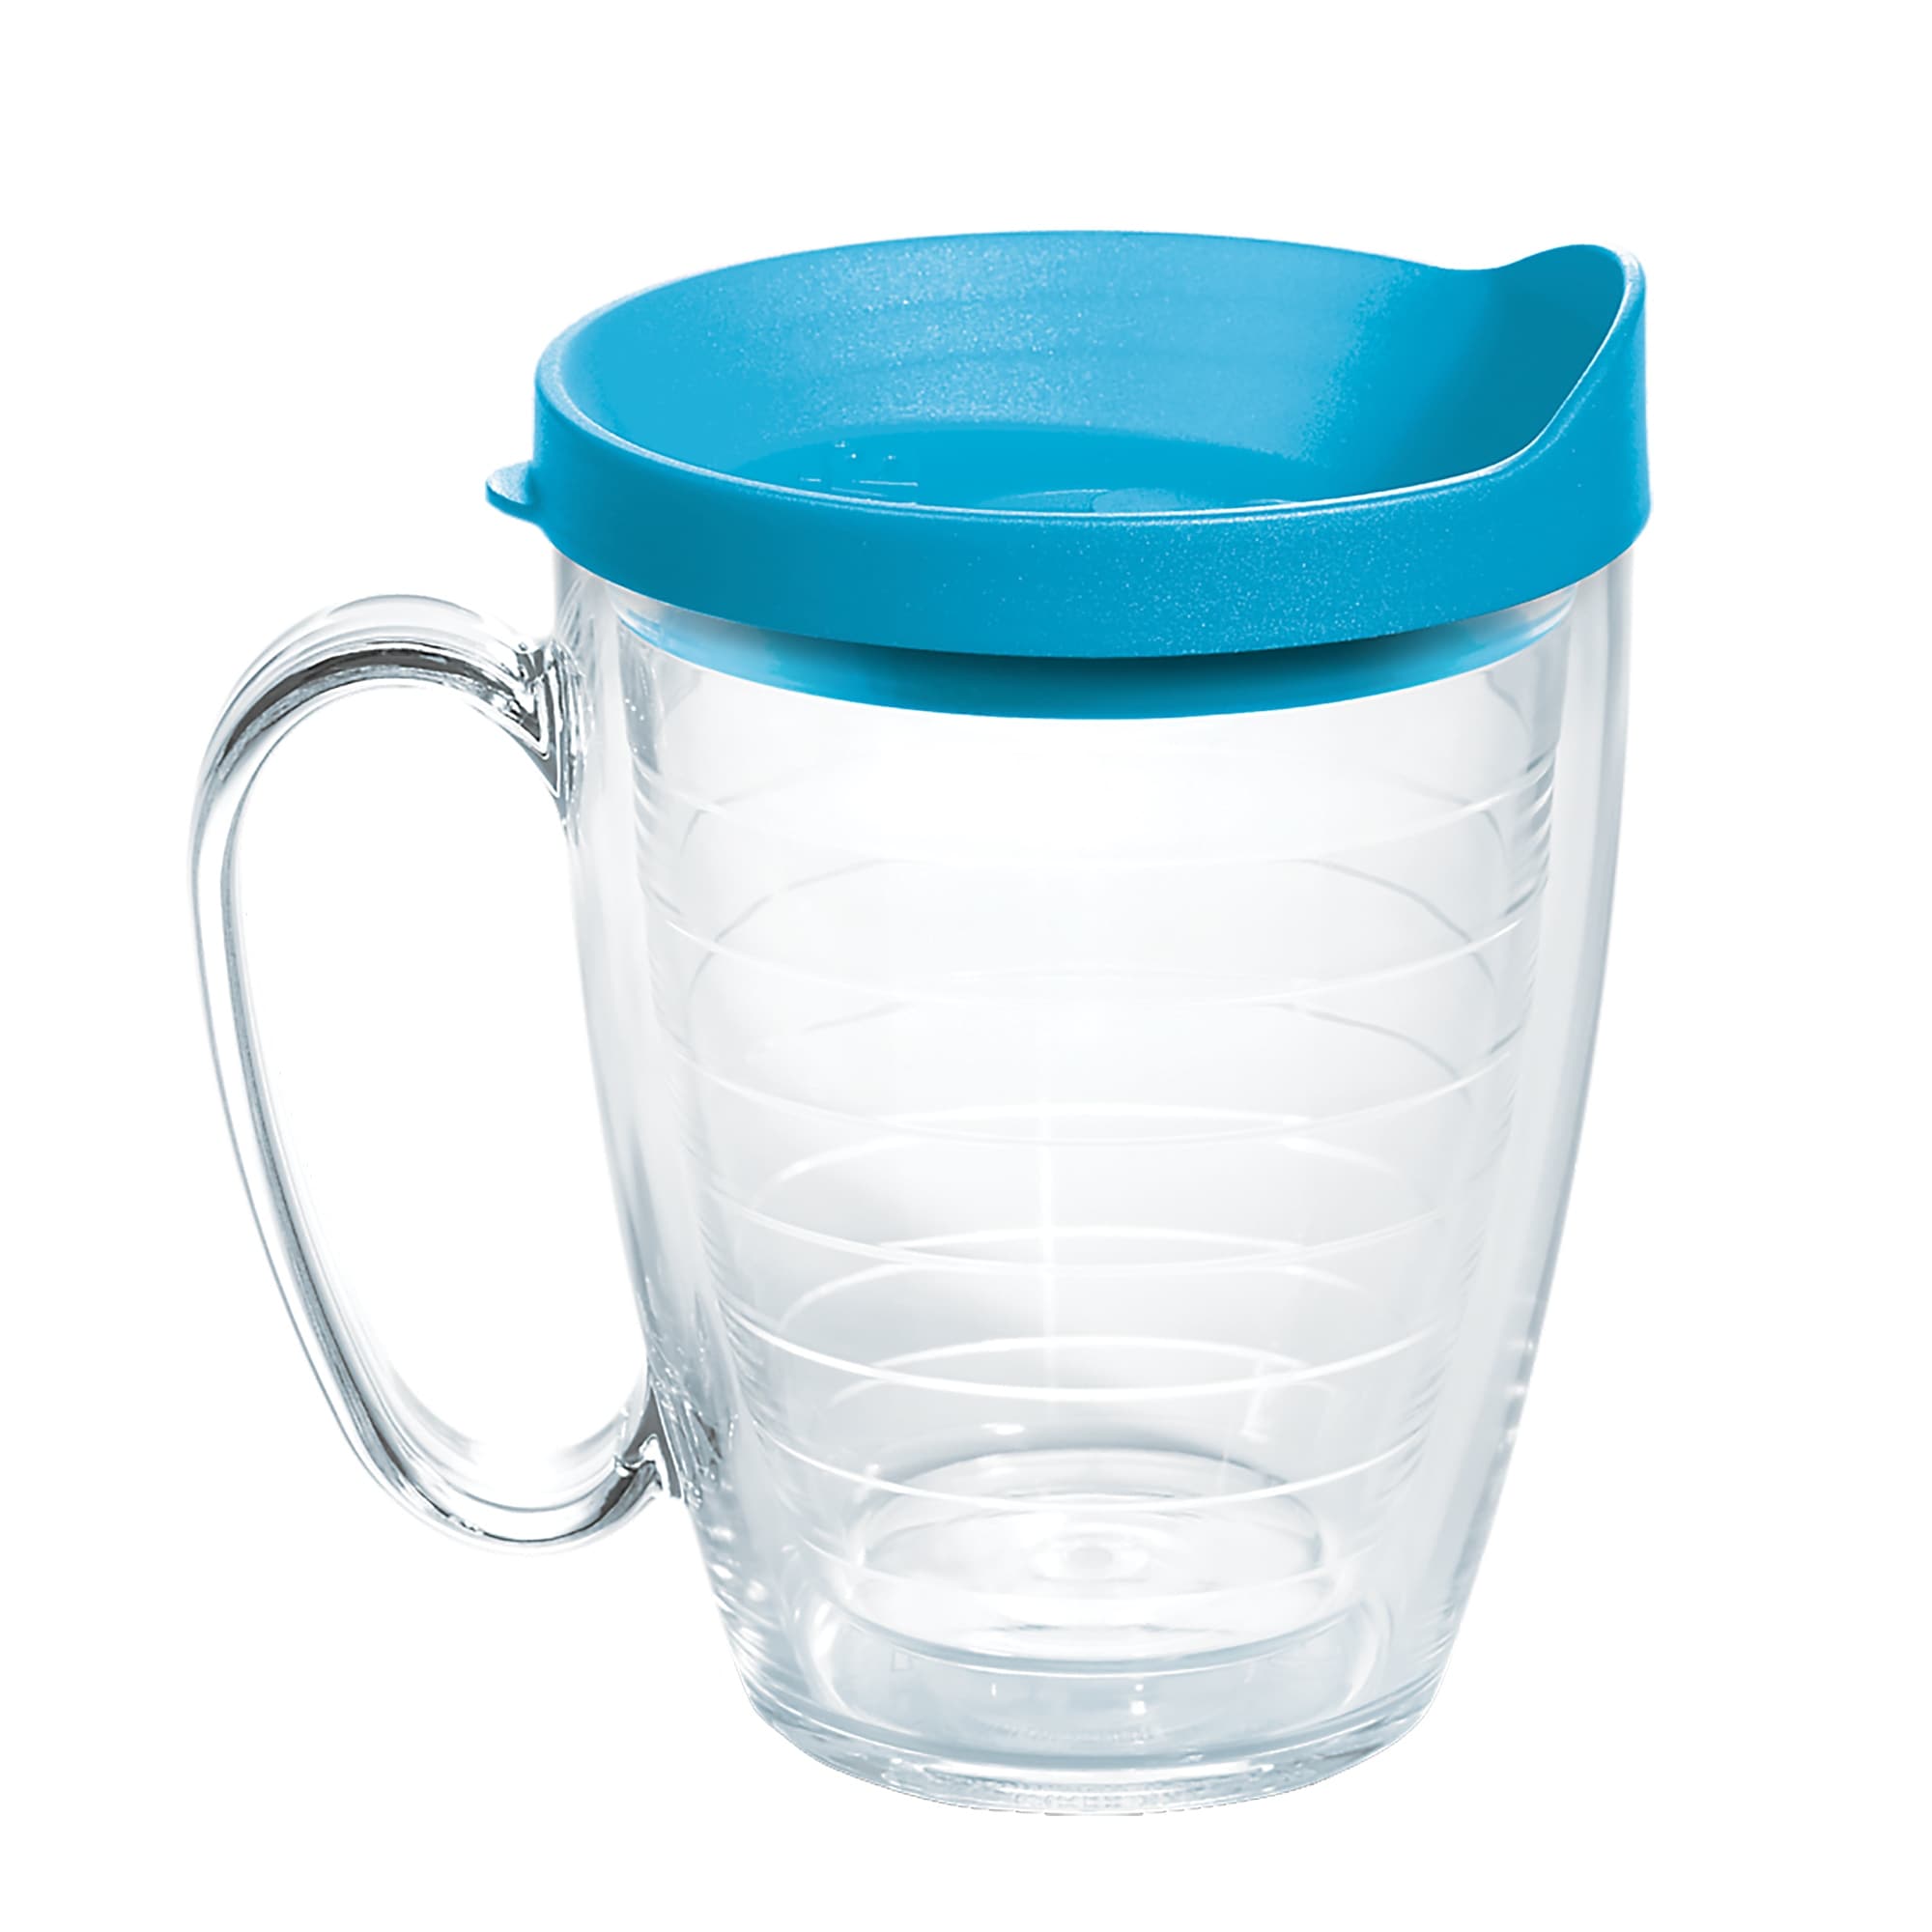 Tervis Clear & Colorful Lidded Made in USA Double Walled Insulated Travel Tumbler, Turquoise Lid